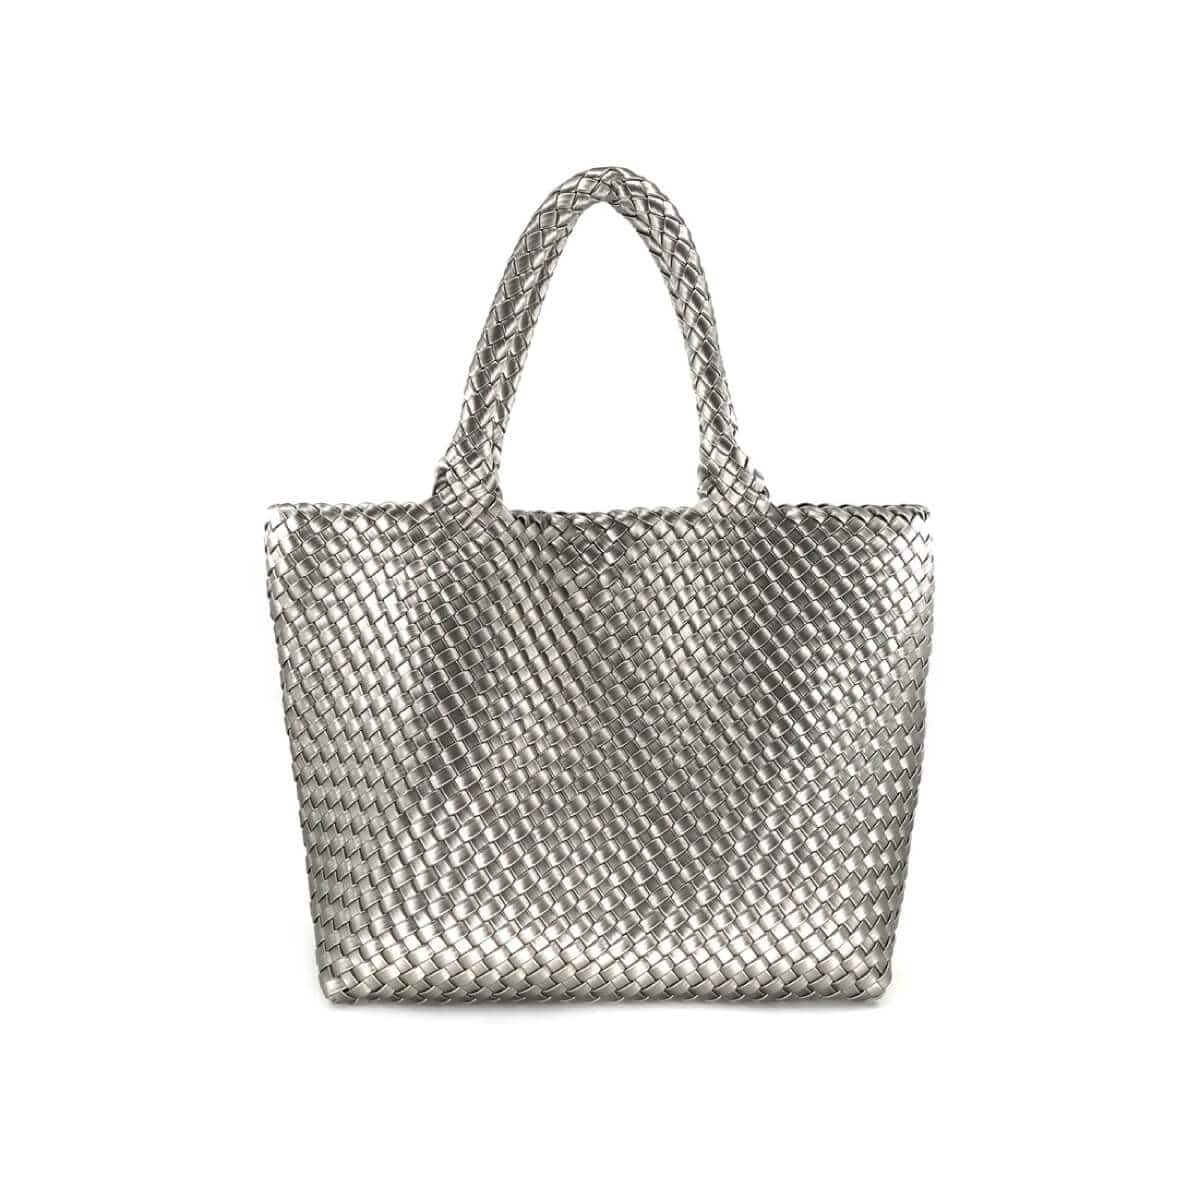 Braided Faux Leather Tote Bag silver front | MILK MONEY milkmoney.co | women's accessories. cute accessories. trendy accessories. cute accessories for girls. ladies accessories. women's fashion accessories.